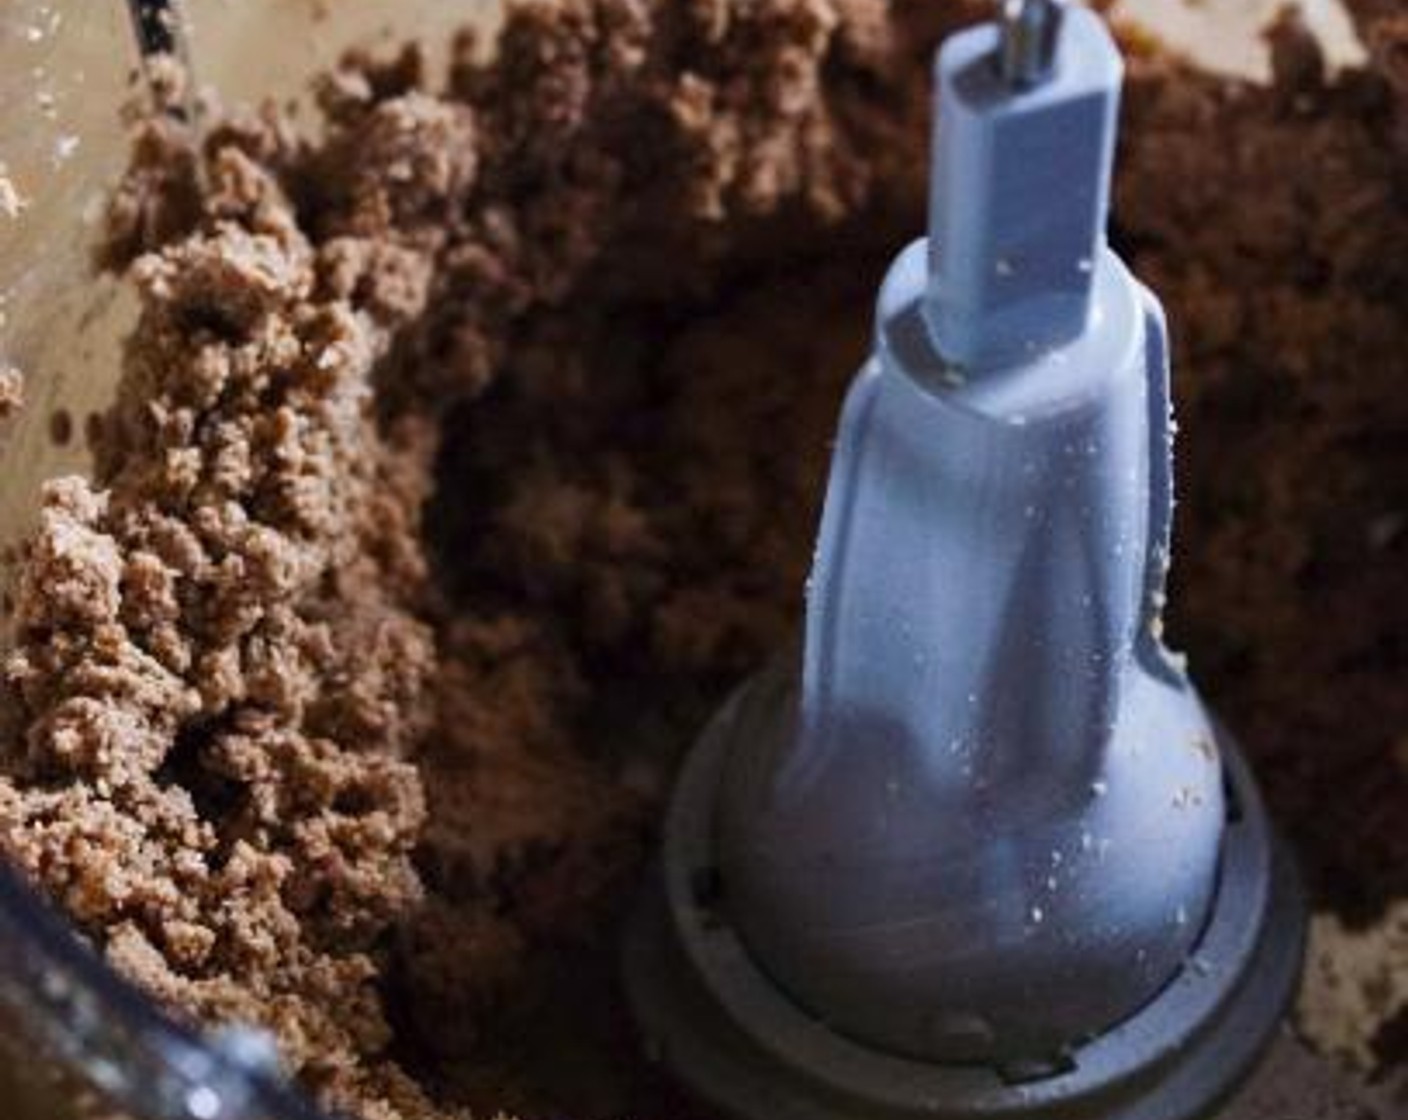 step 1 In a food processor, place together the Almonds (2/3 cup), Chocolate Hazelnut Spread (1/3 cup), Unsweetened Coconut Flakes (1/2 cup), Dates (3), Chocolate Plant-Based Protein Powder (1 scoop), Coconut Oil (1 Tbsp), and Chia Seeds (1 Tbsp).